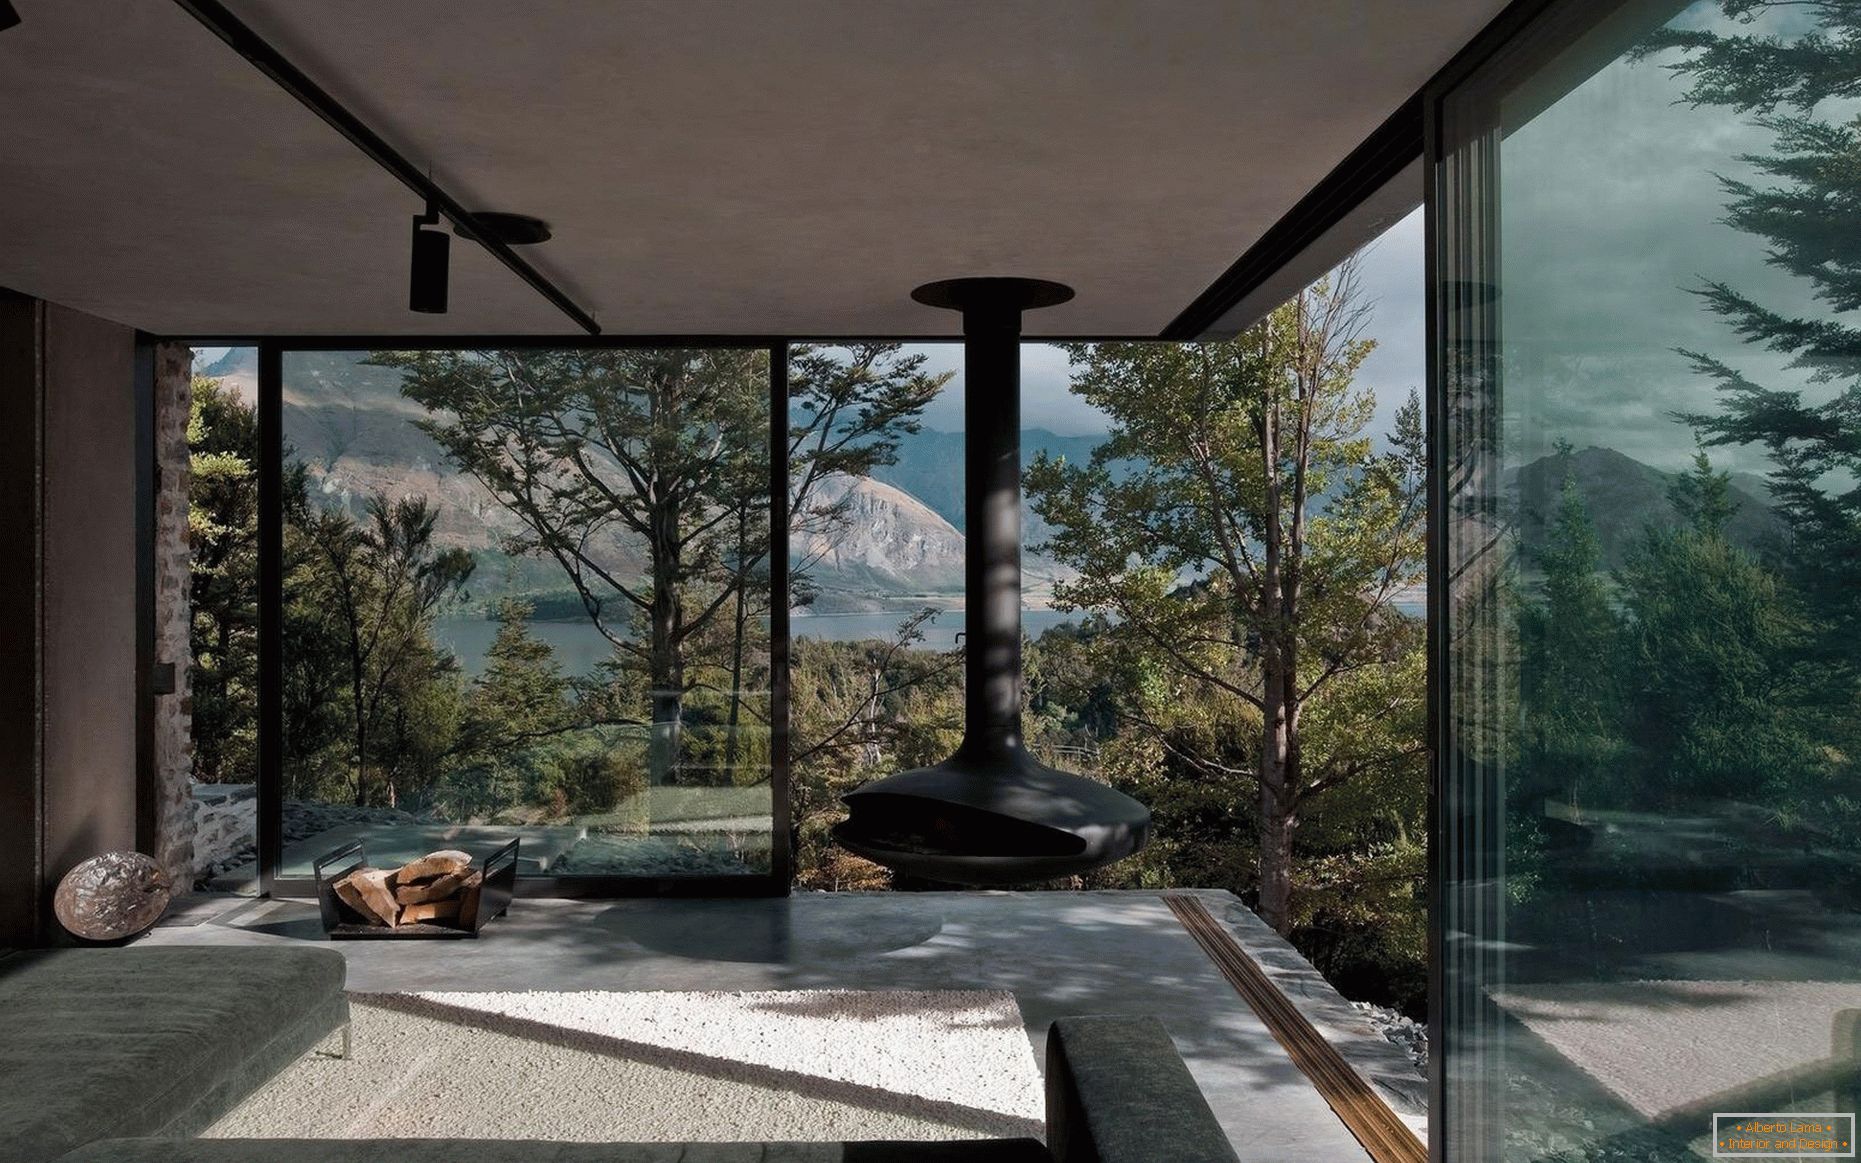 Room overlooking the forest and mountains